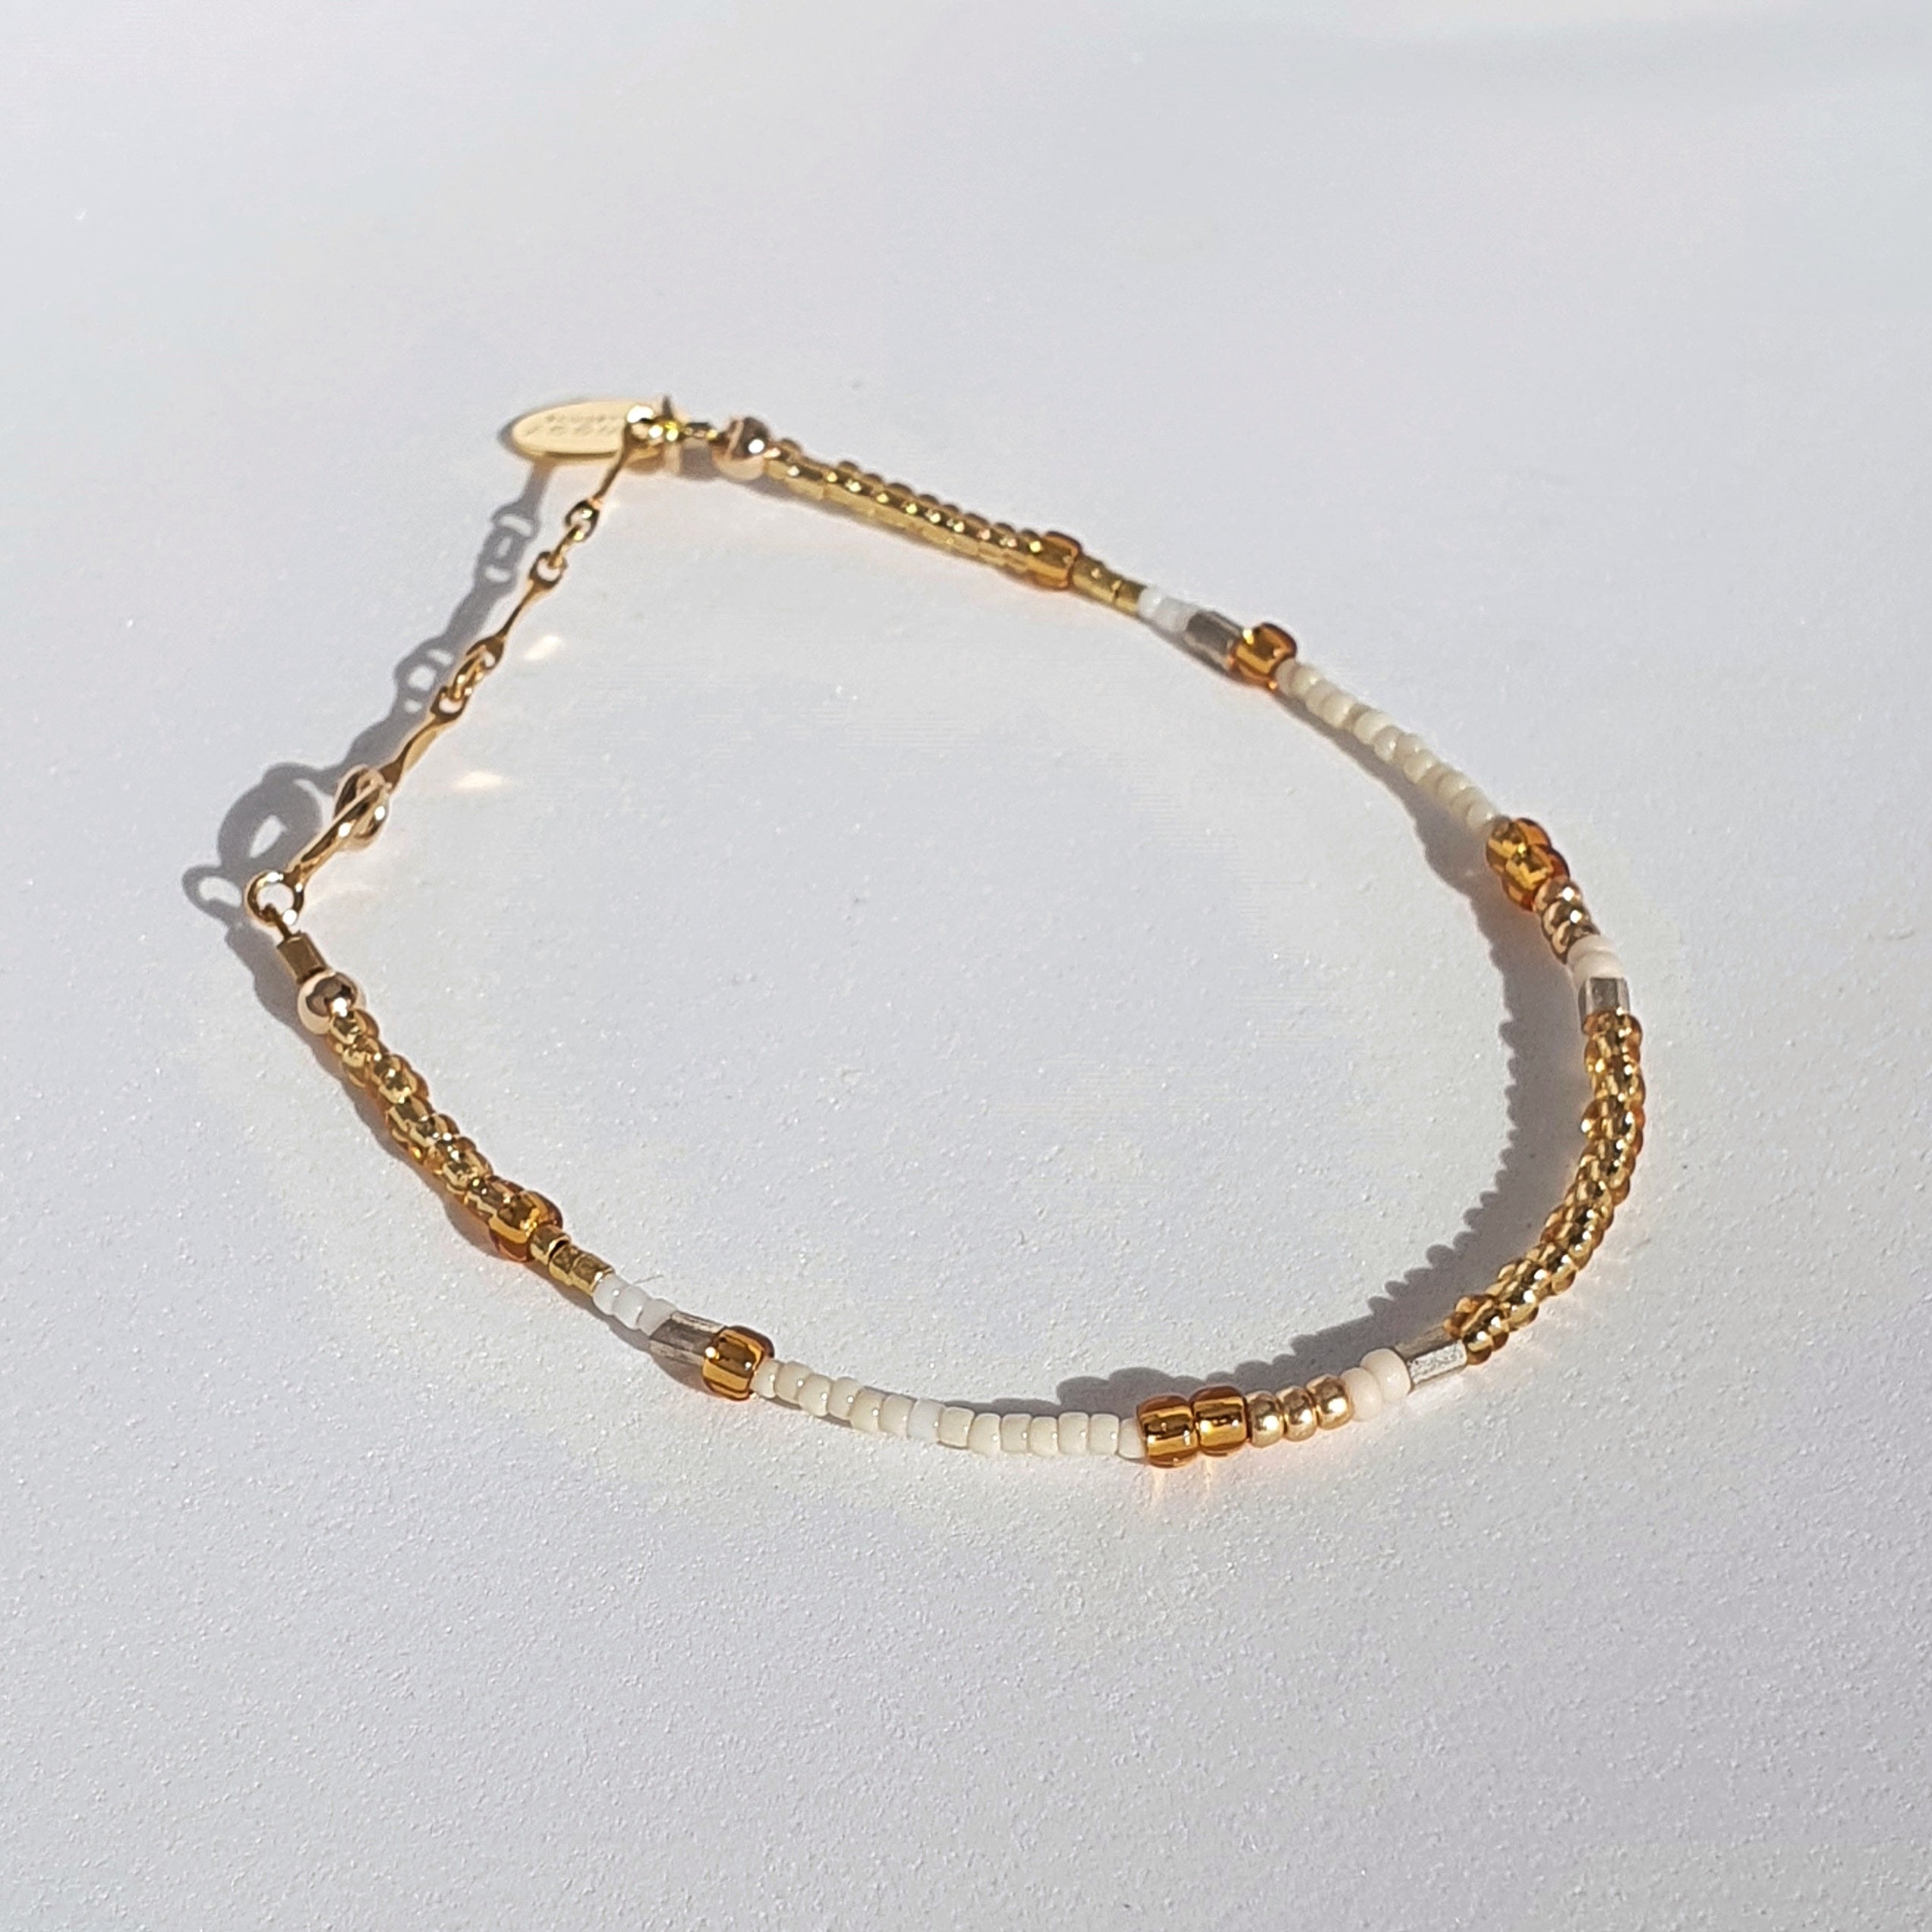 A minimal, tonal design featuring gold and white coloured glass seed beads.